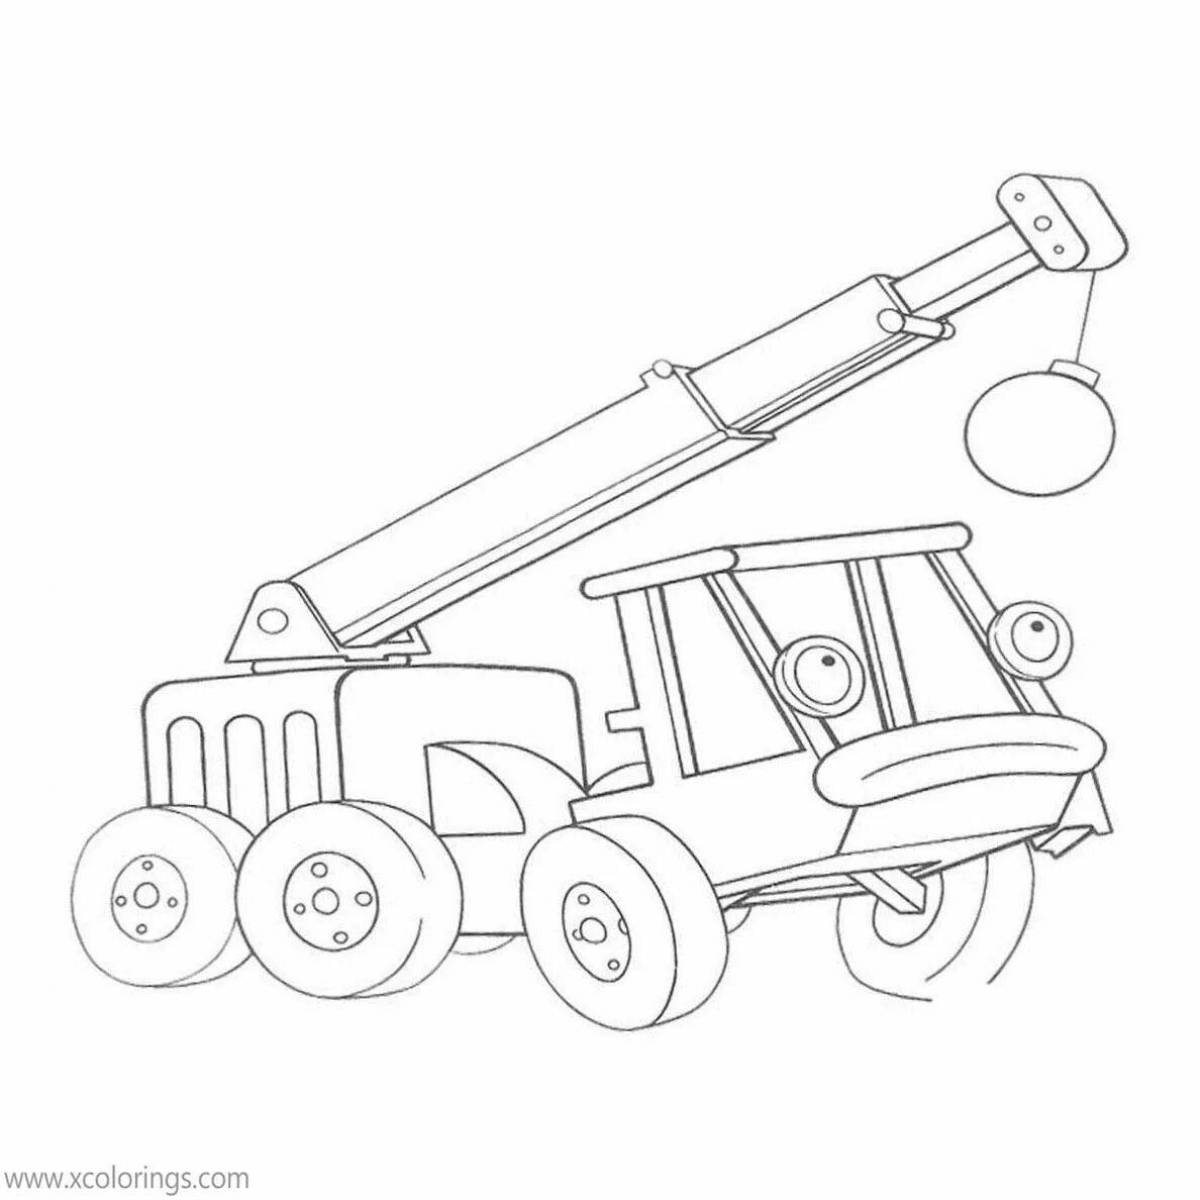 Exquisite drill coloring page